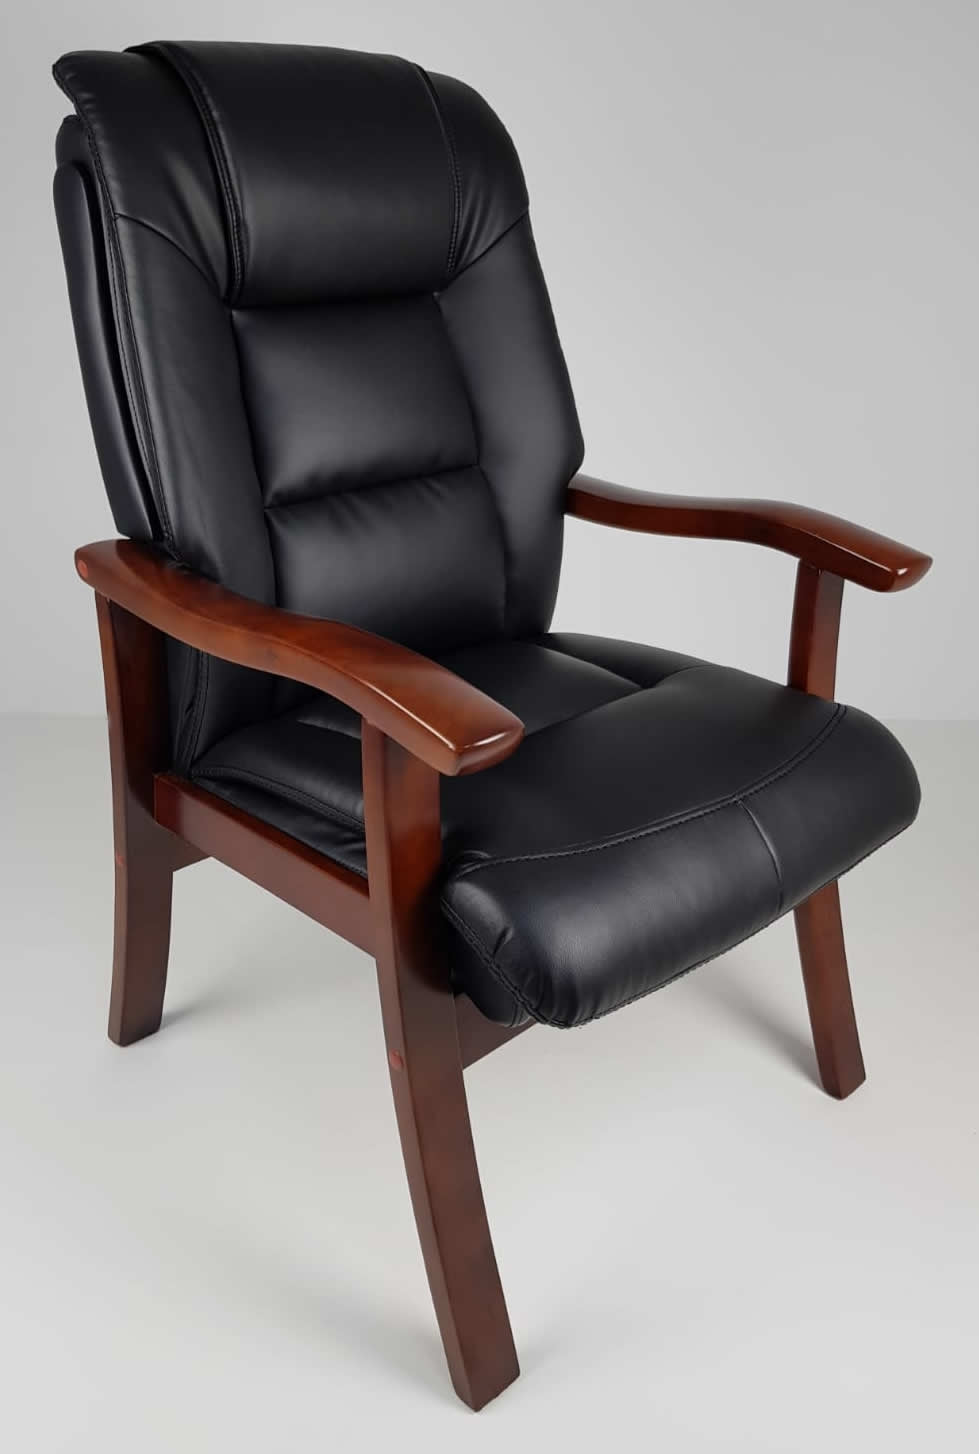 Visitor Chair Black Leather with Walnut Arms - CHA-1830C